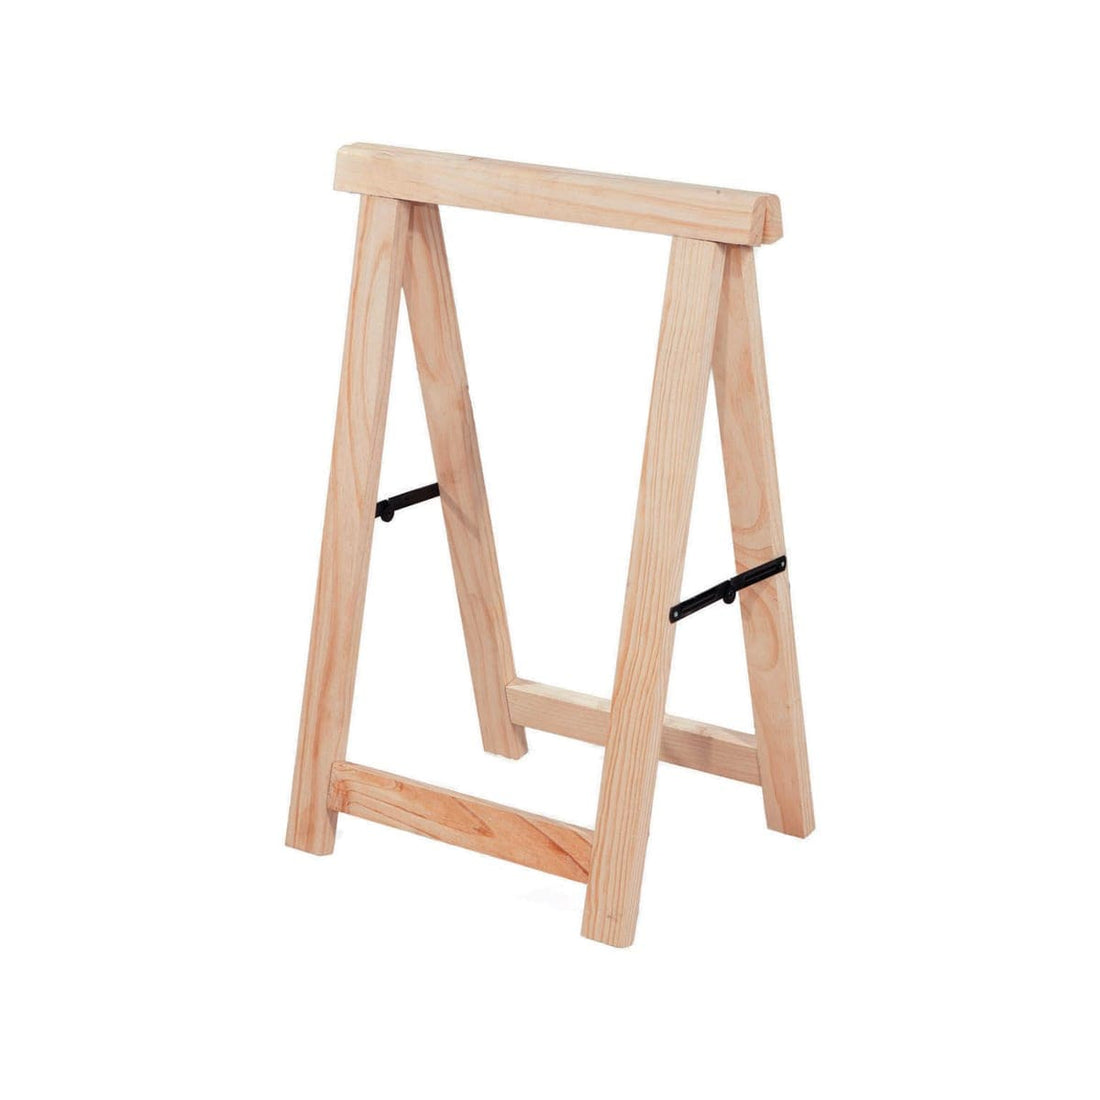 EASEL L53XP35XH75 CM SOLID PINE - best price from Maltashopper.com BR440002788